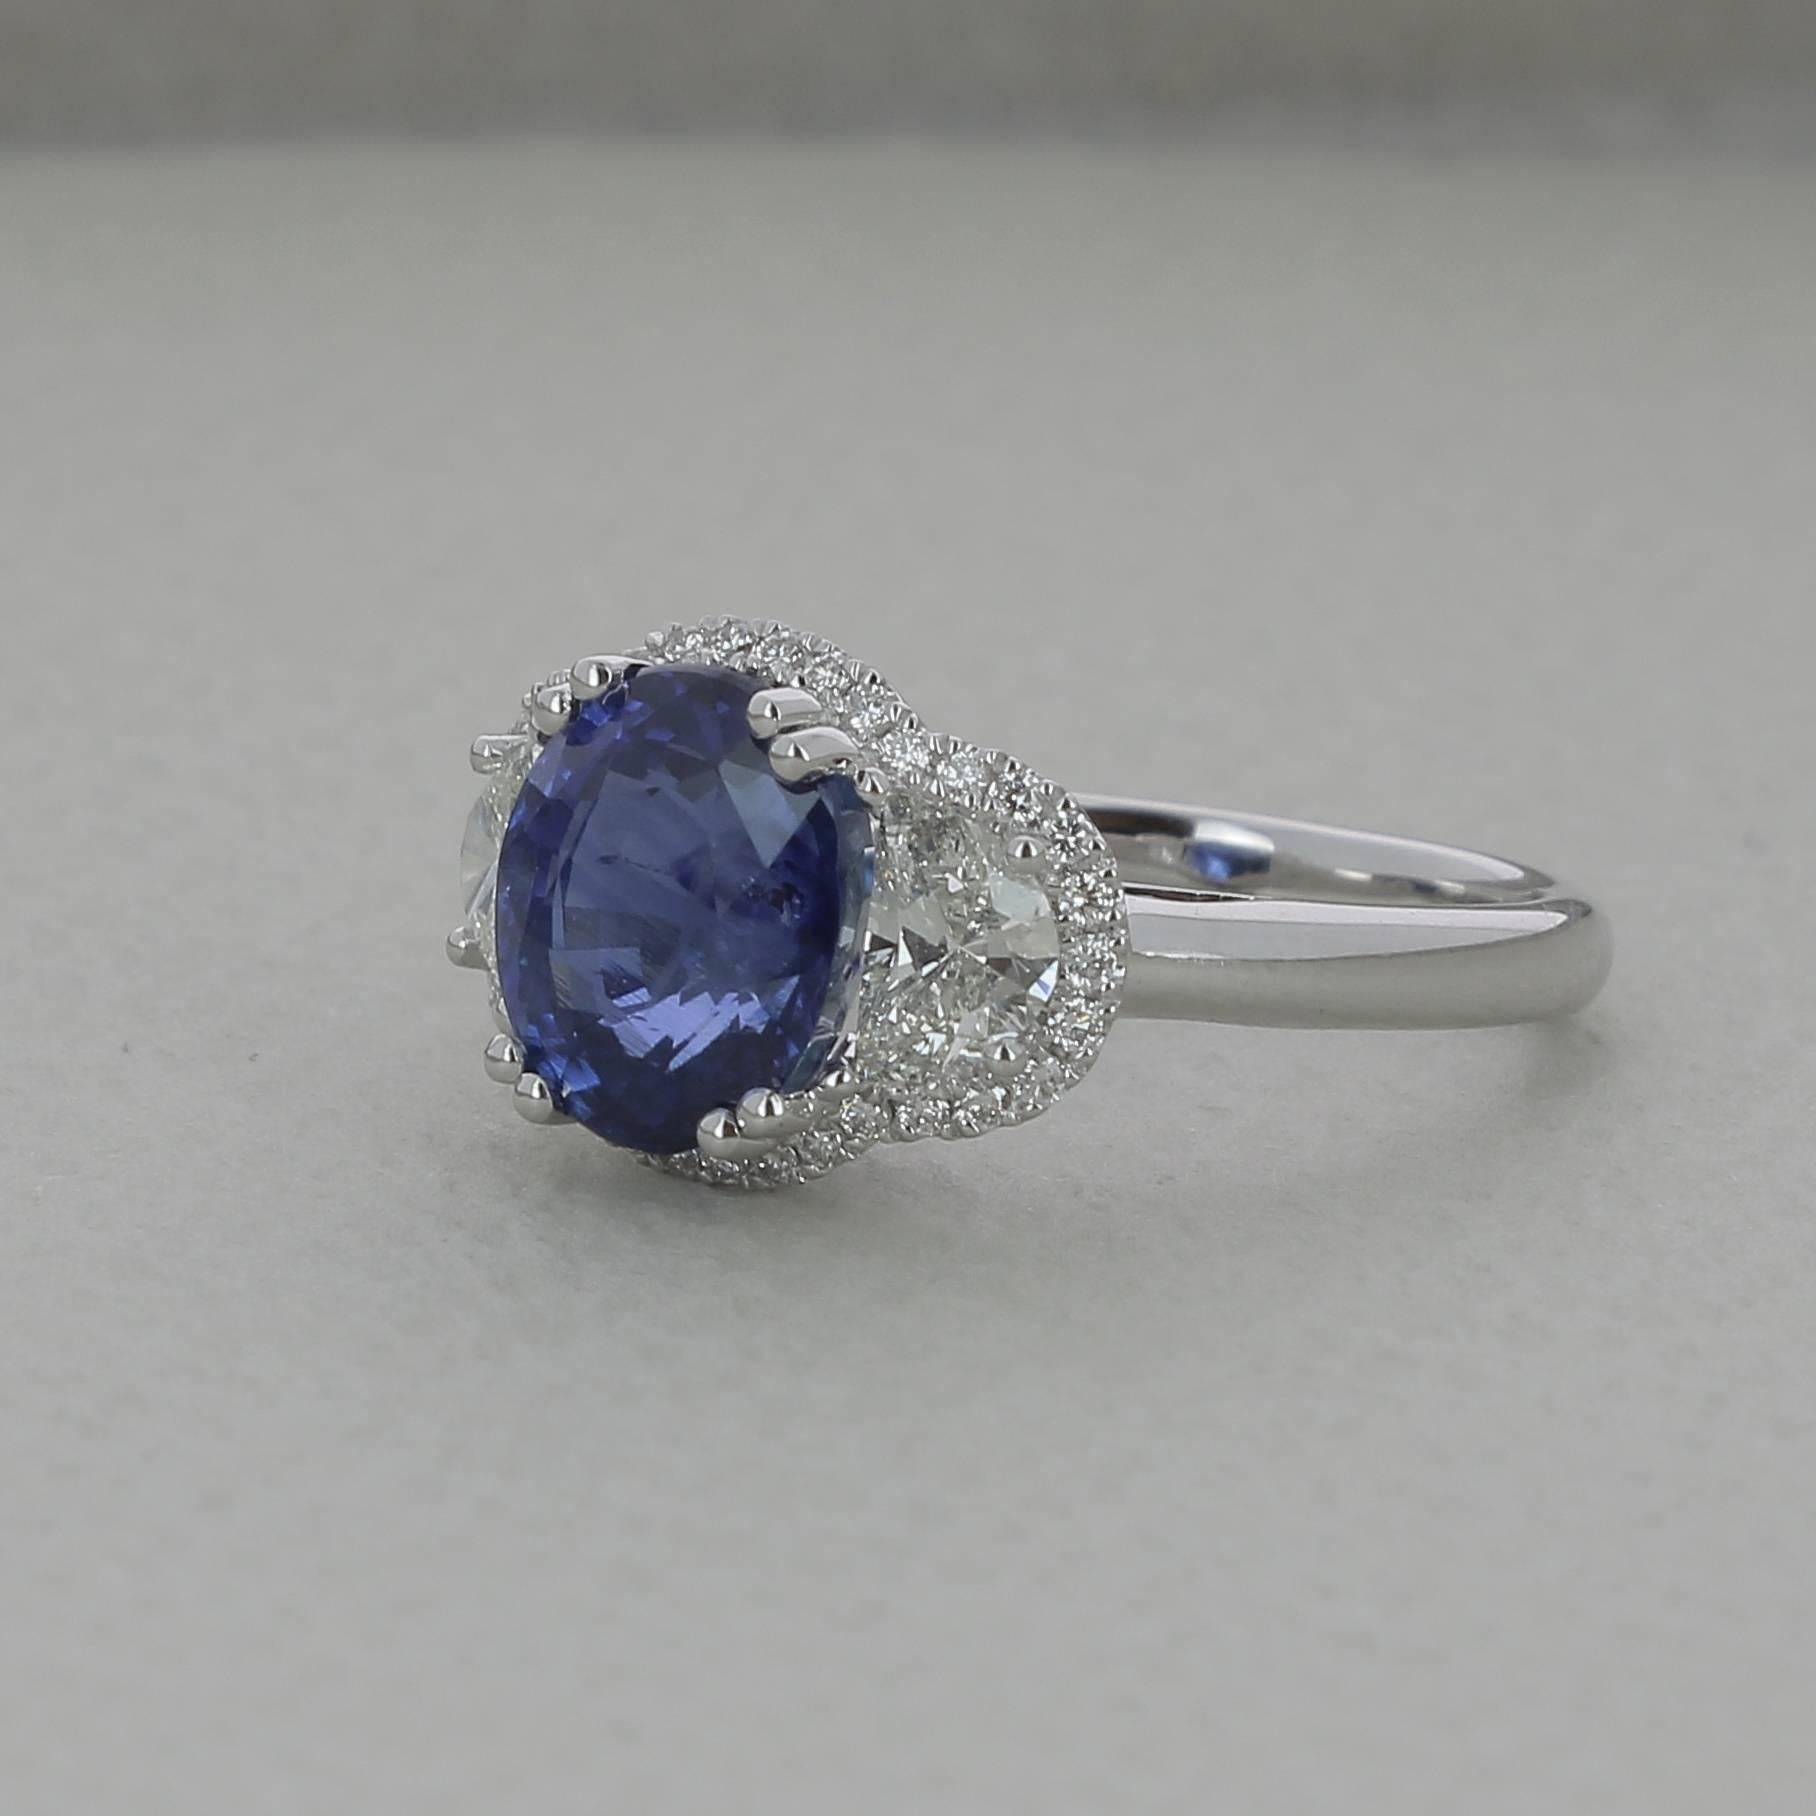 An amazing Oval Royal Blue Blue Sapphire Ring, flanked on each side by a single Half-Moon Diamonds weighing 0.76 Carats and surround with Round Diamond.
The total weight of the Sapphire is 4.55 Carats, the Gemstone is certified as a Vivid Blue